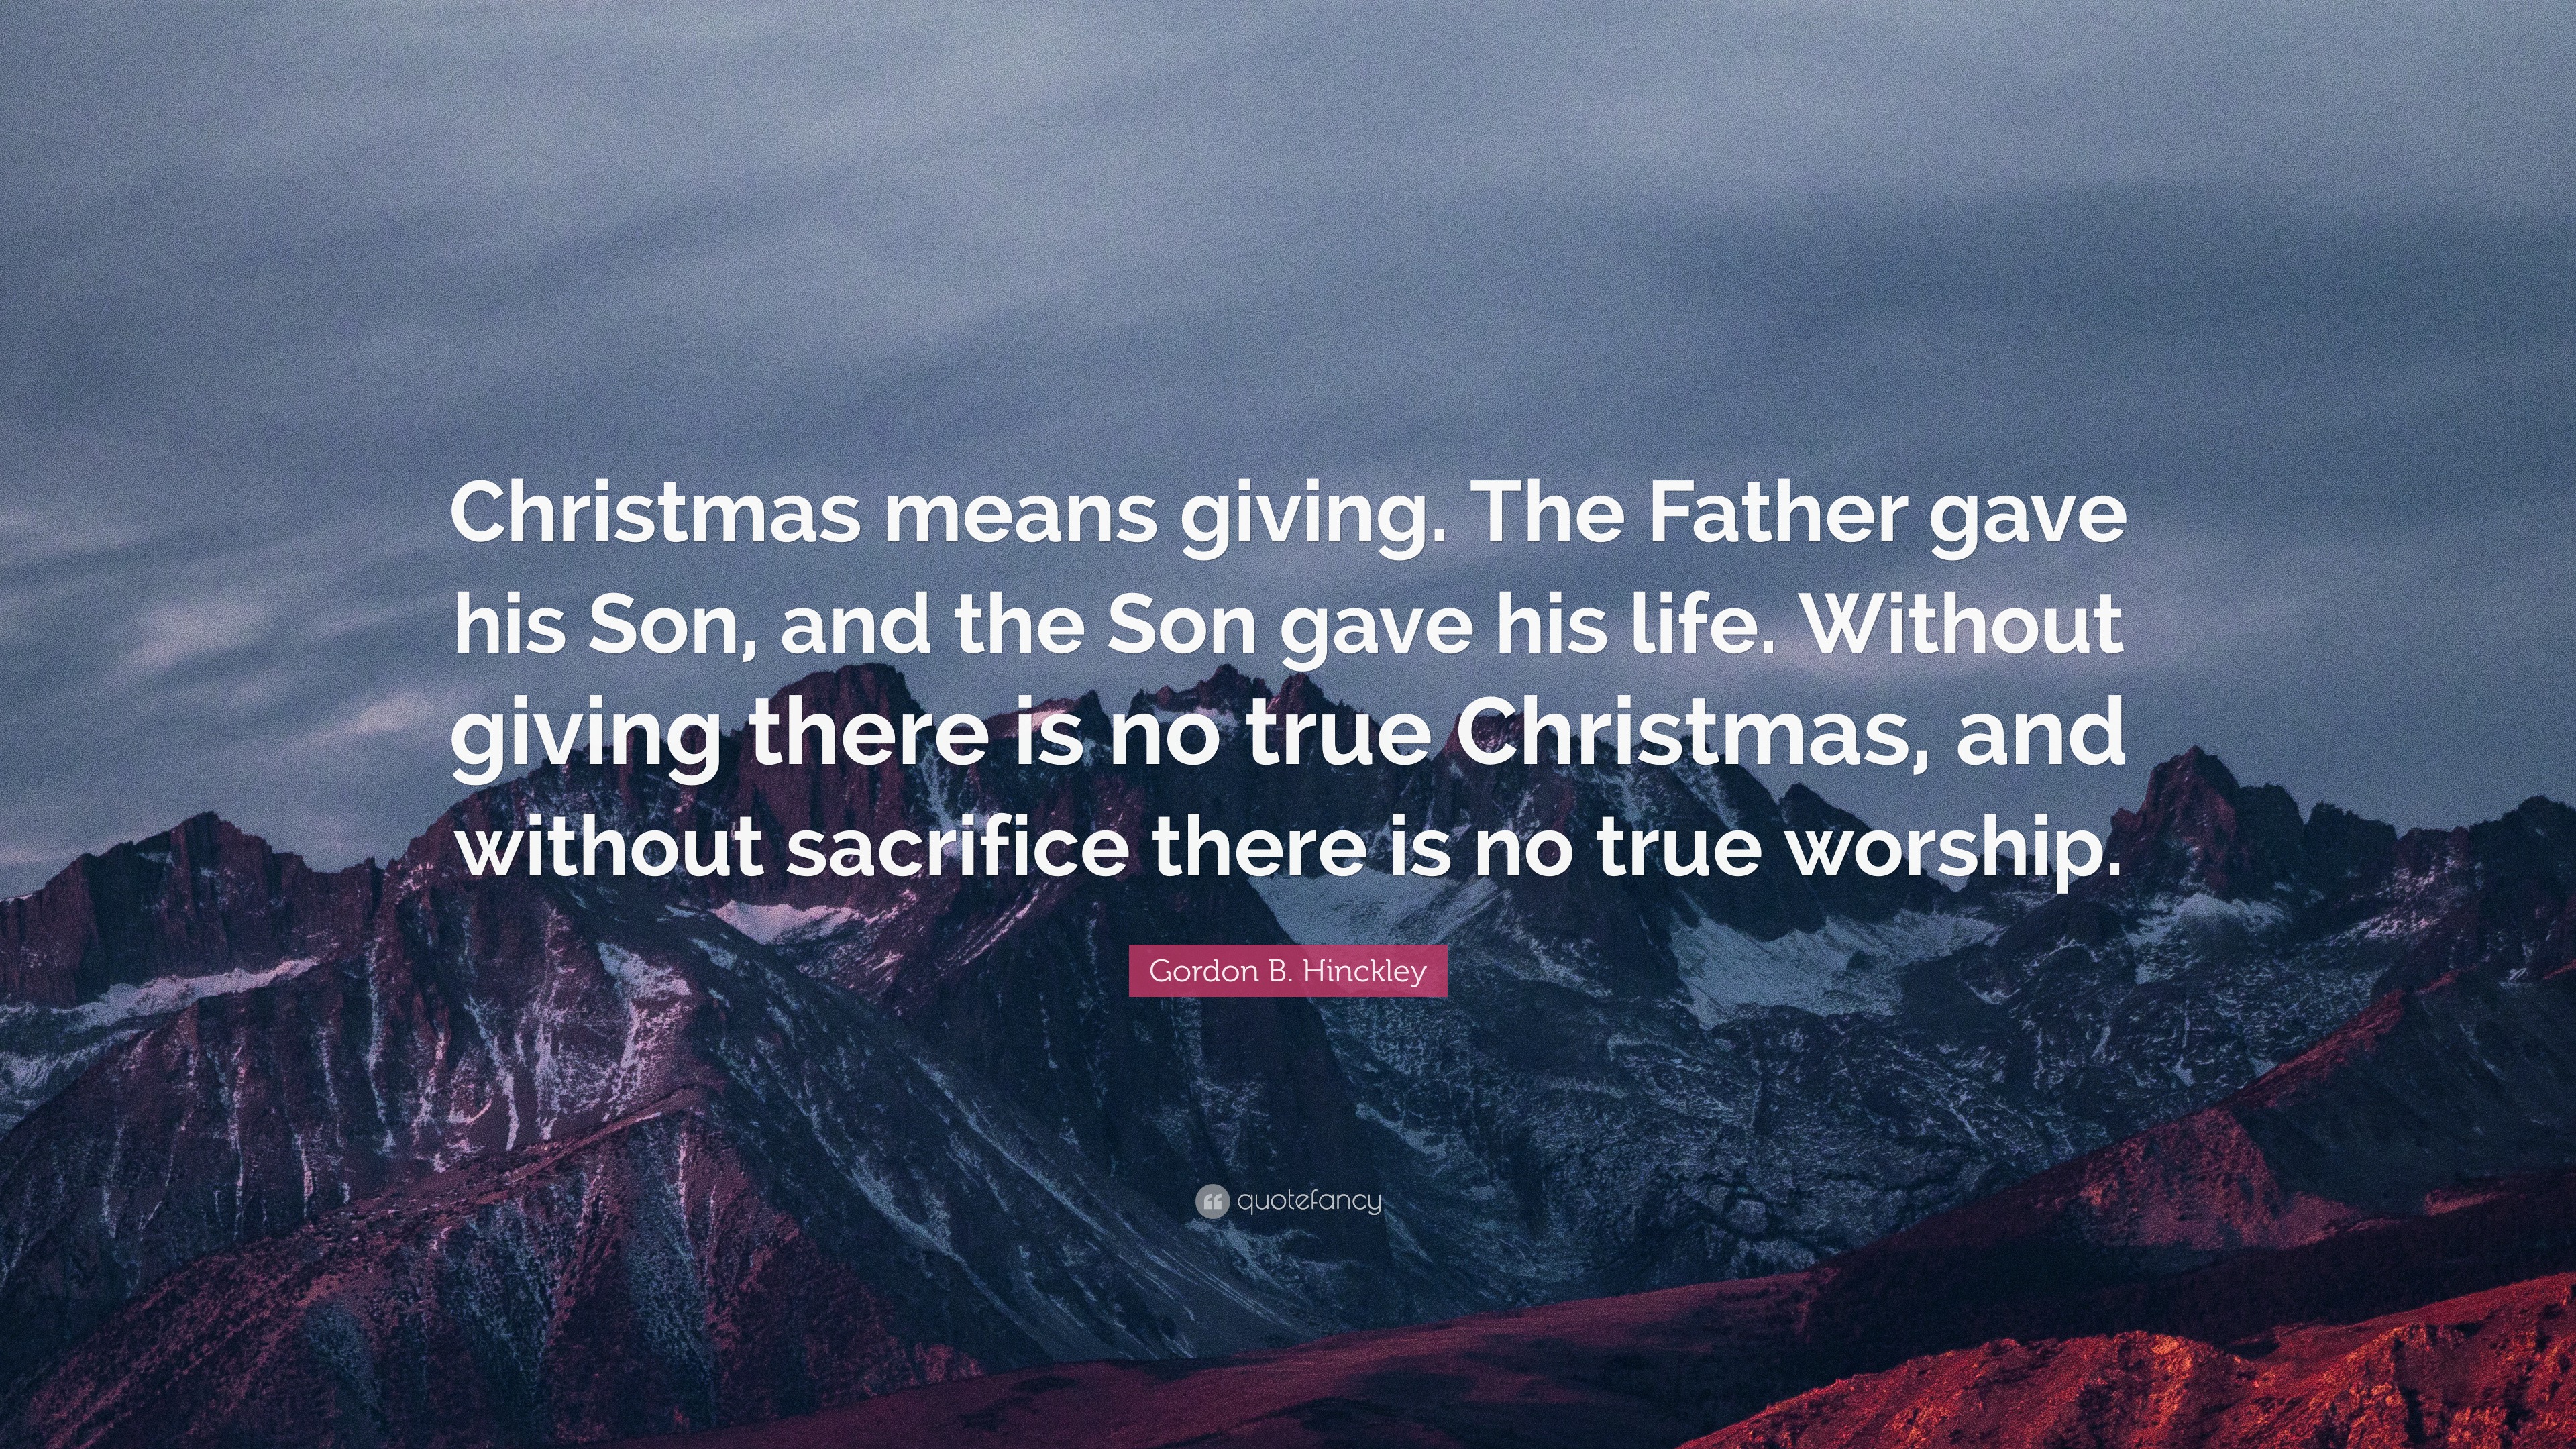 Gordon B Hinckley Quote “Christmas means giving The Father gave his Son